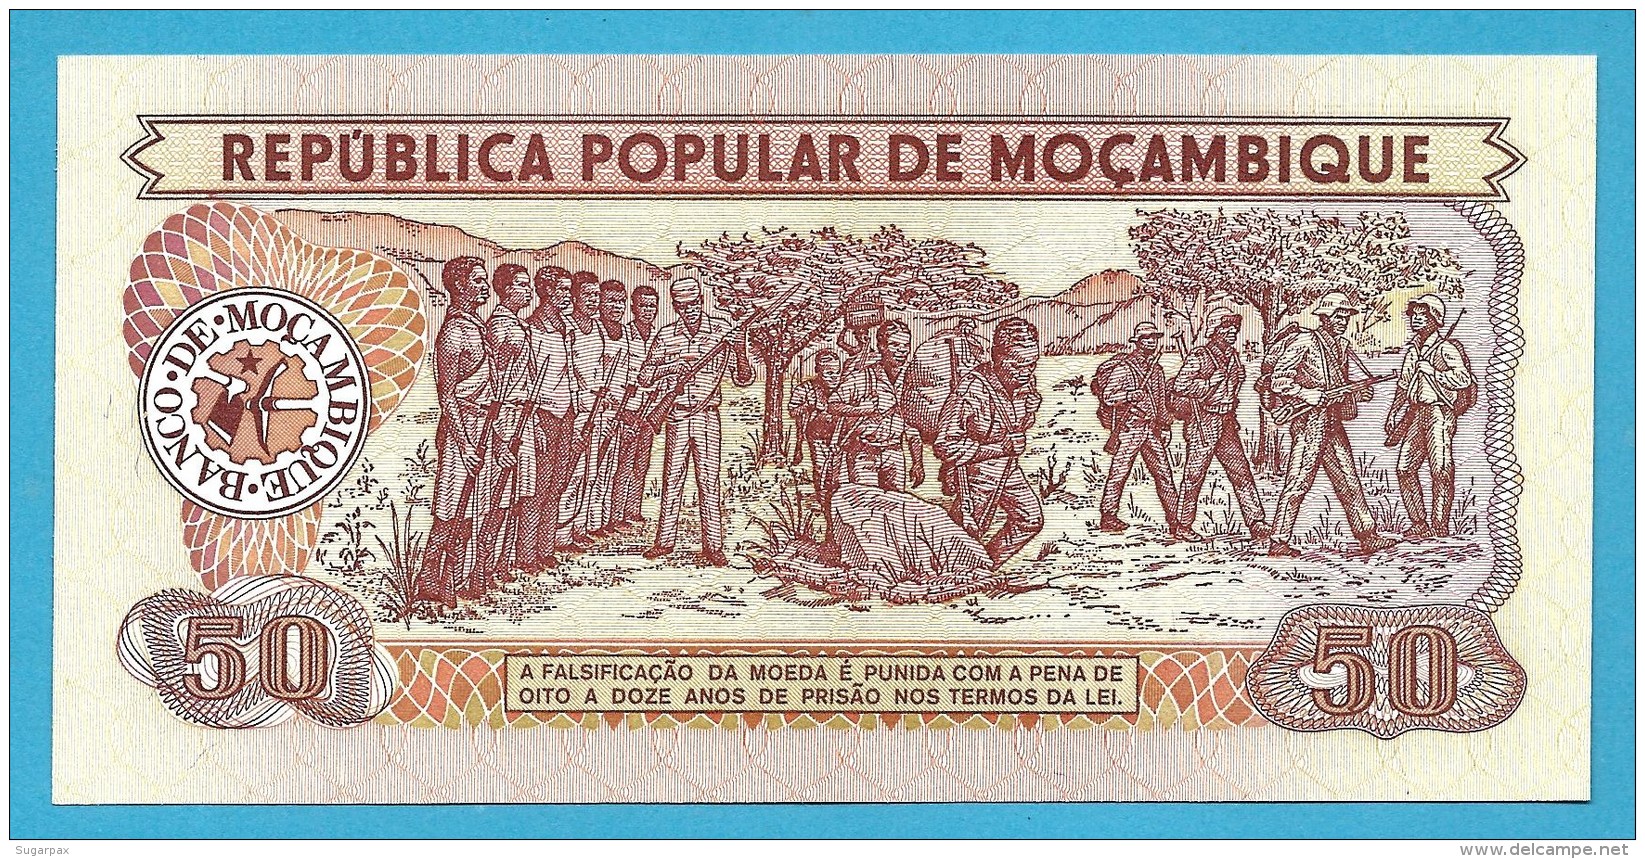 MOZAMBIQUE - 50 METICAIS - 16.06.1986 - P 129.b - Unc. -  Série AK - Soldiers, Flag Ceremony / Soldiers In Training - Mozambico